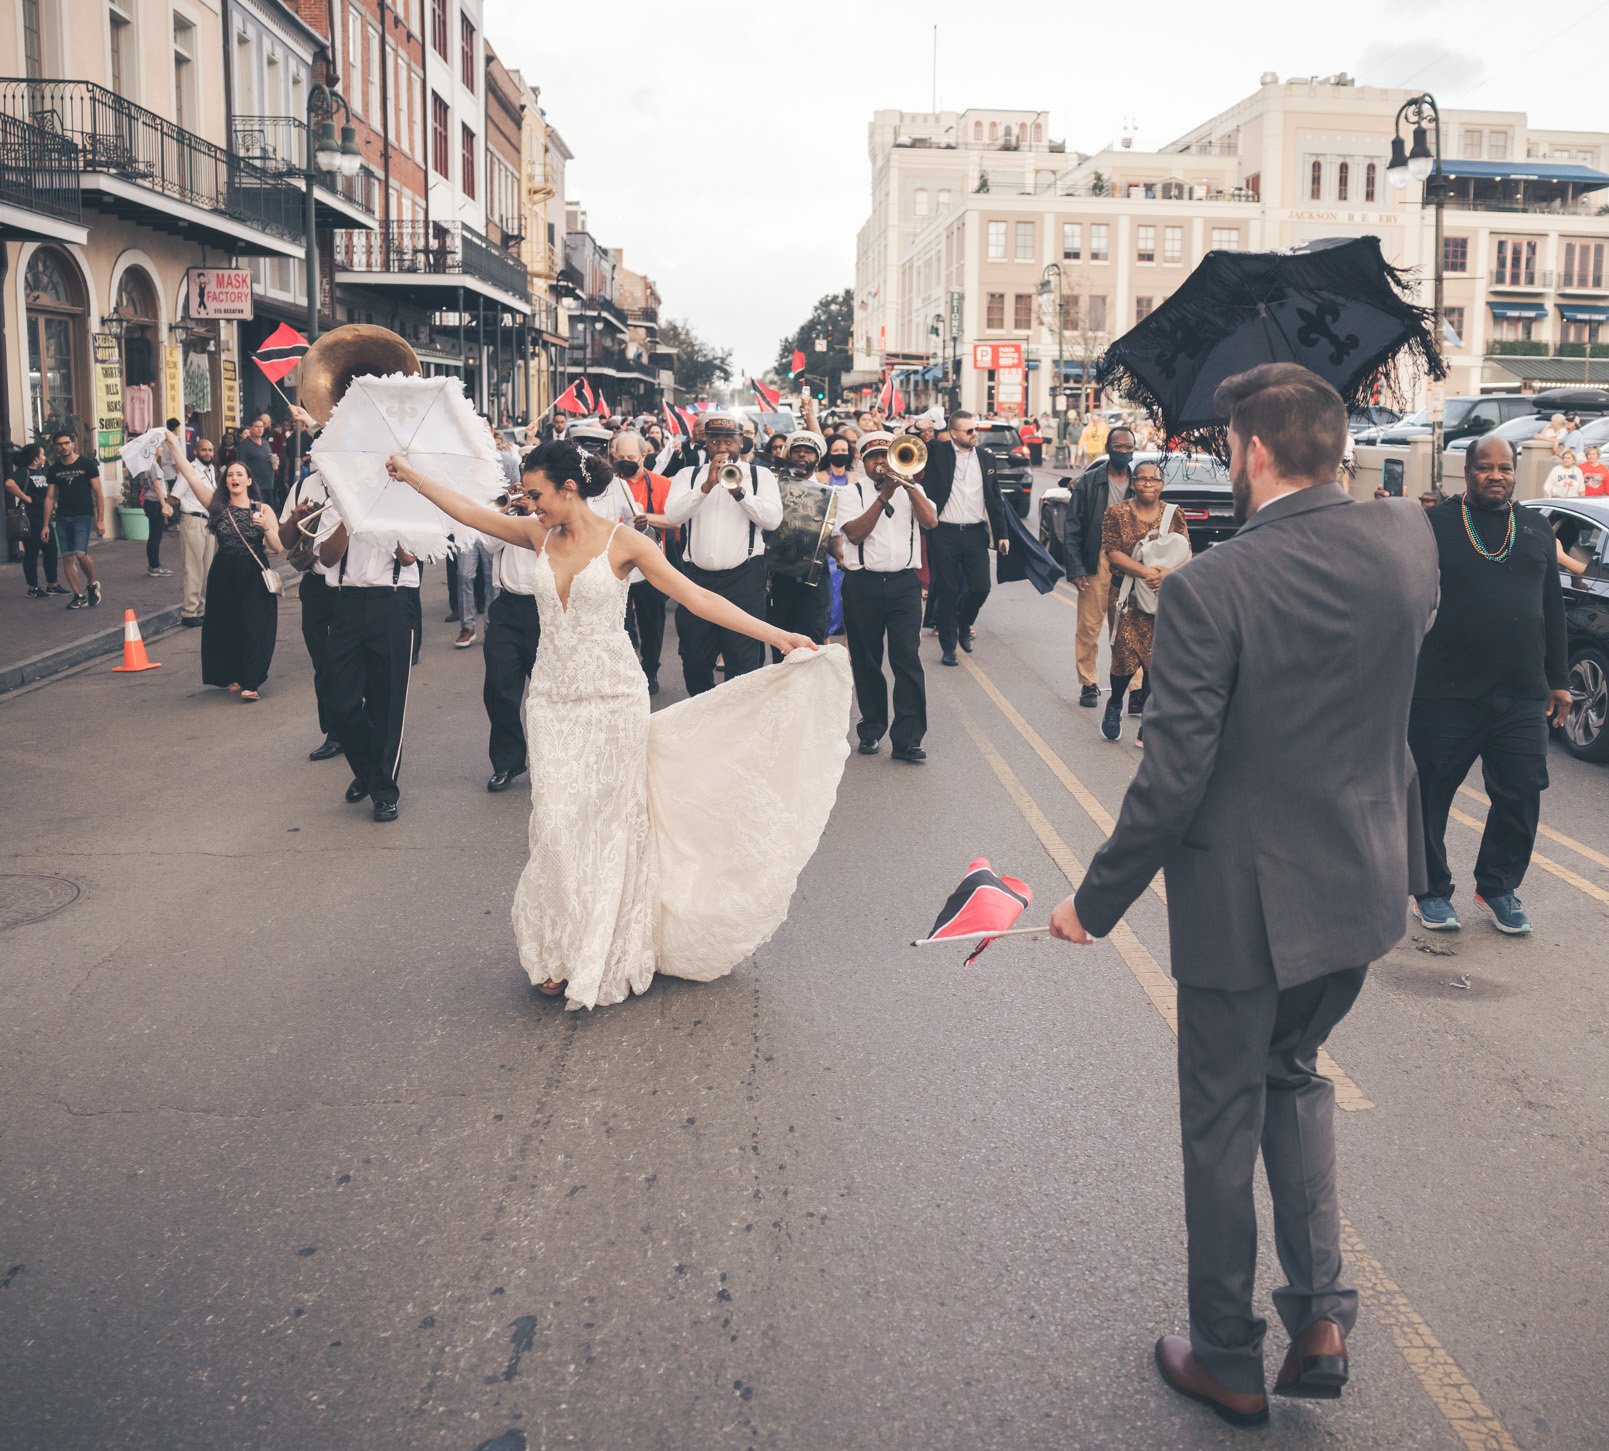 A bride and groom hold umbrellas in the air and lead a parade in the streets of New Orleans on their wedding day.